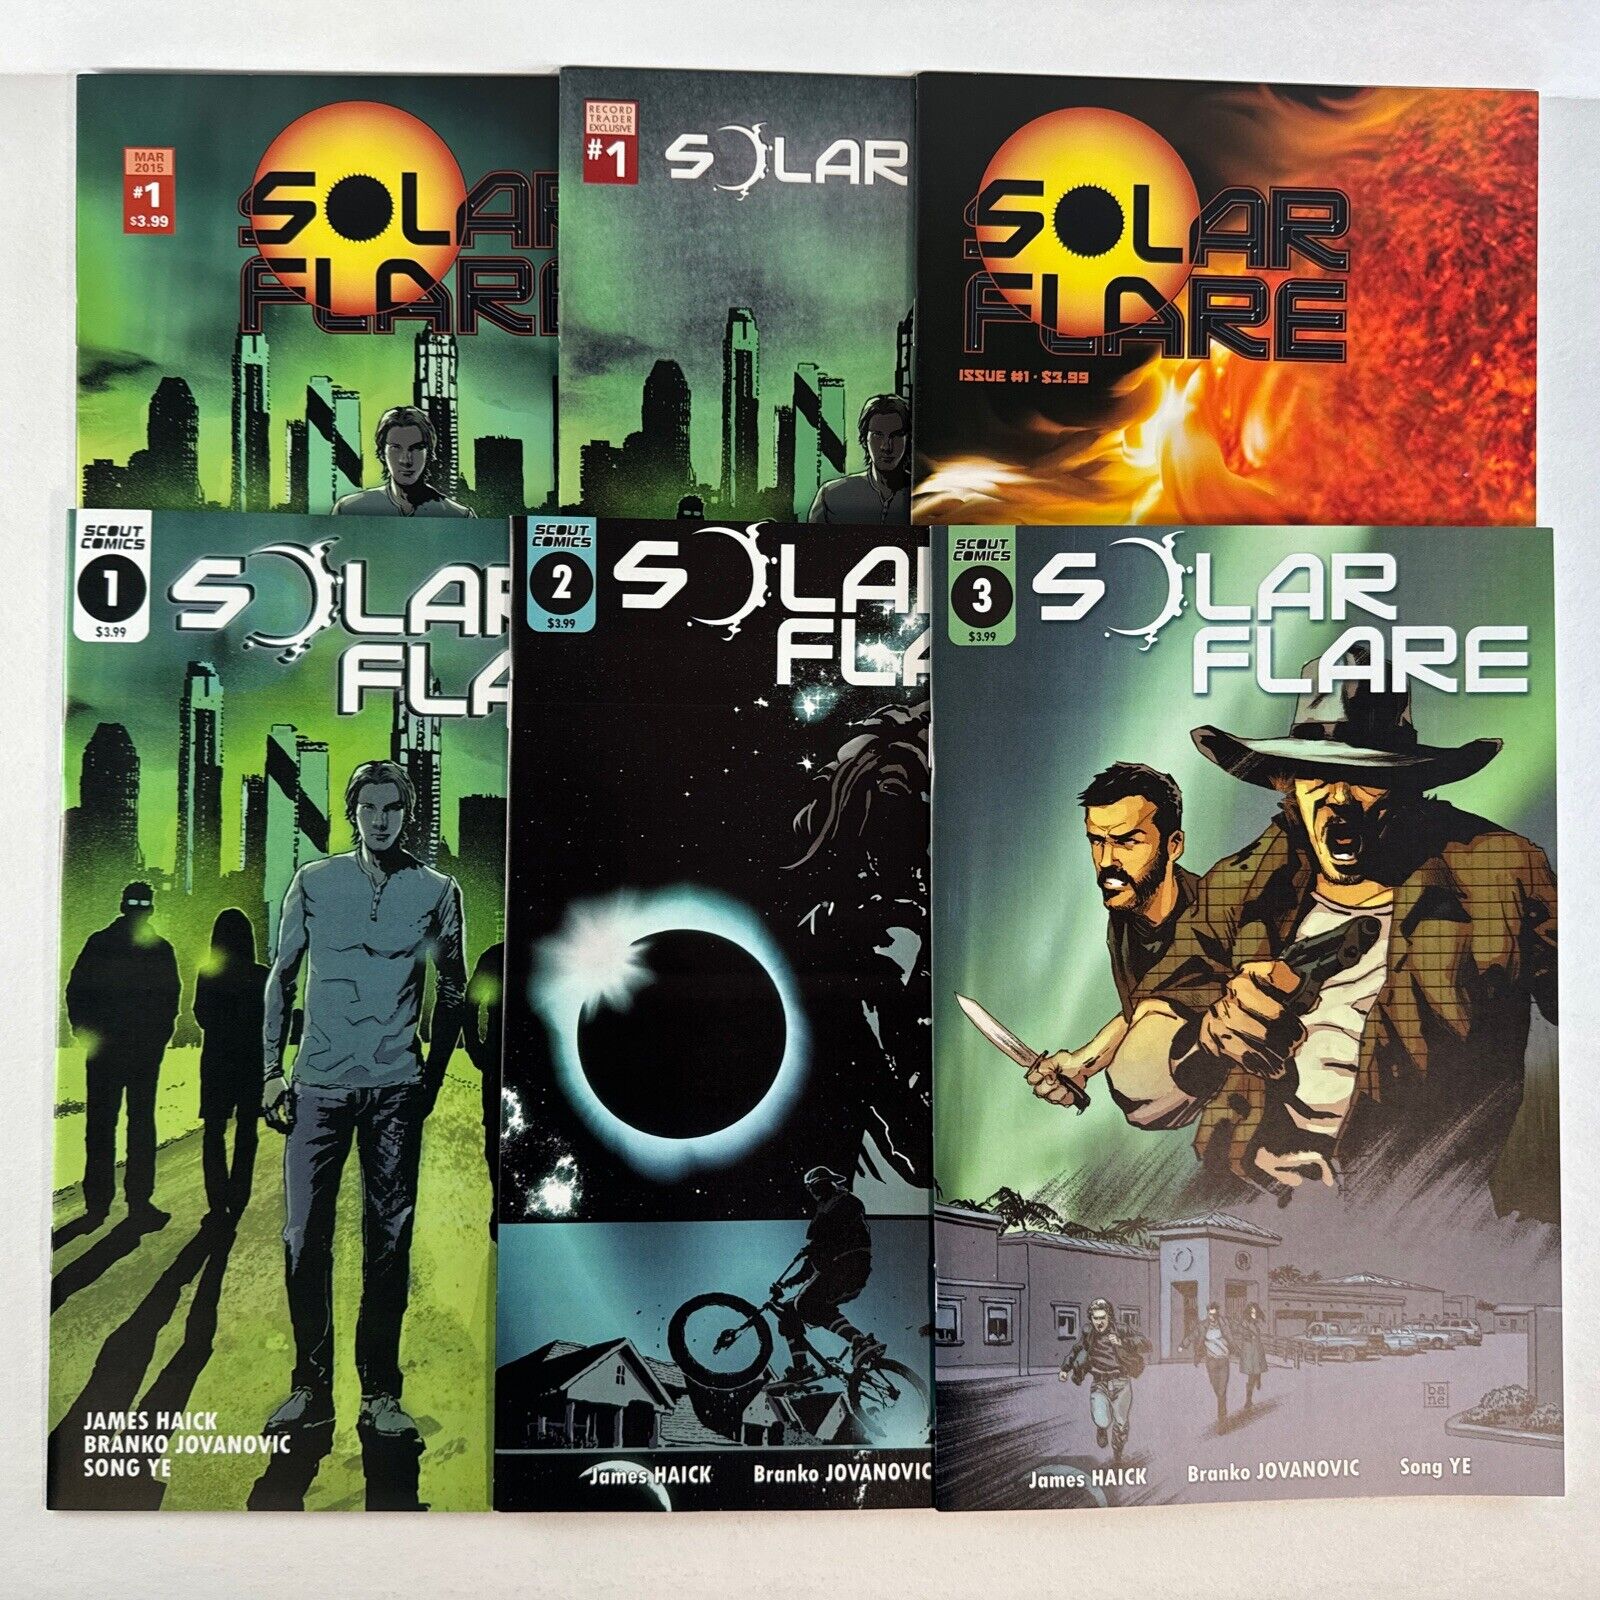 SOLAR FLARE #1 thru #3 with extra #1 Variant Editions. Scout Comics